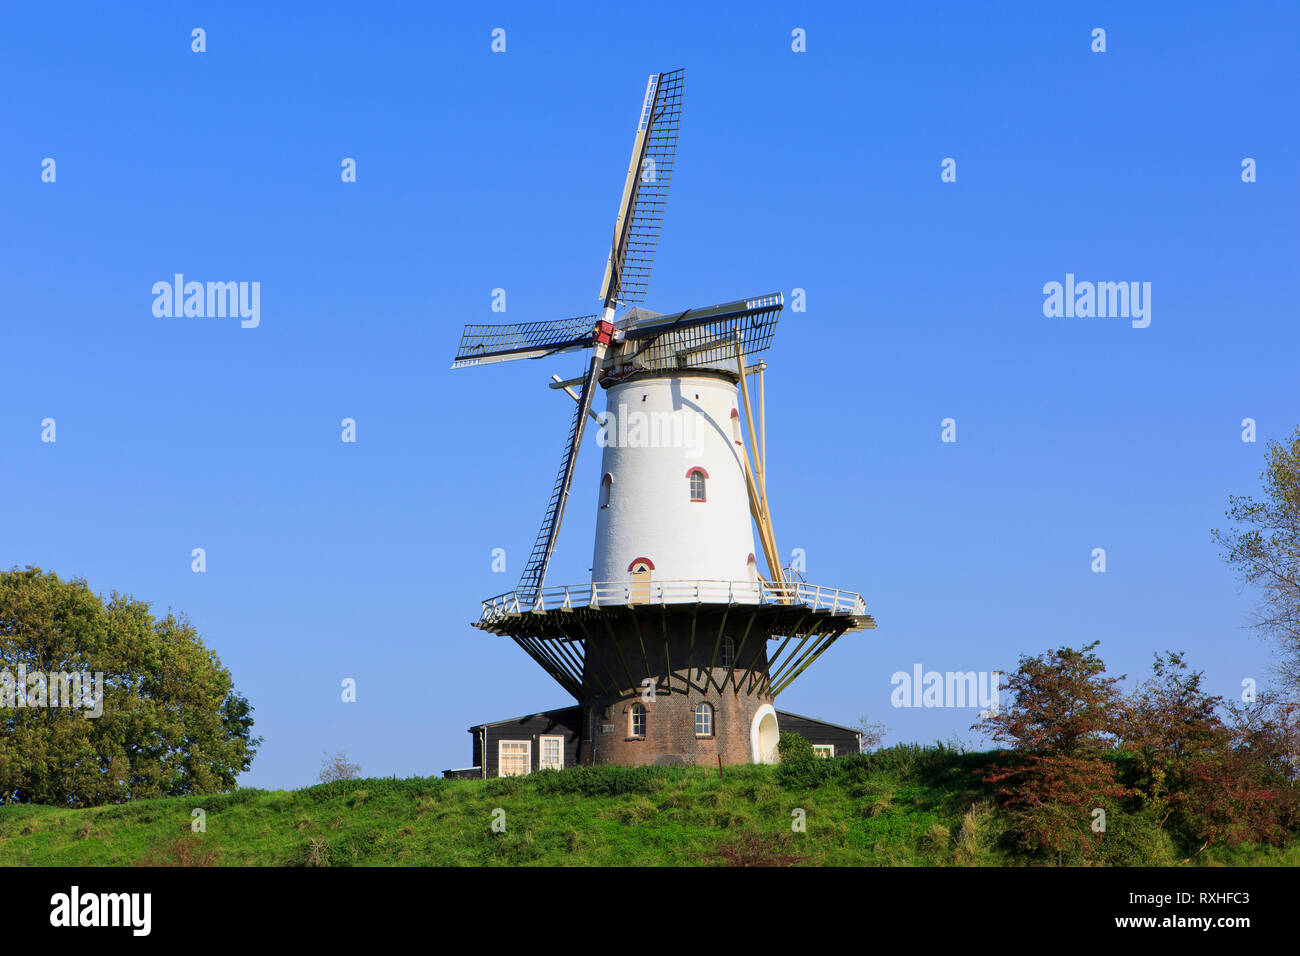 The round brick grist mill (De Koe - The Cow) from 1907 in Veere Netherlands on a beautiful day in autumn Stock Photo